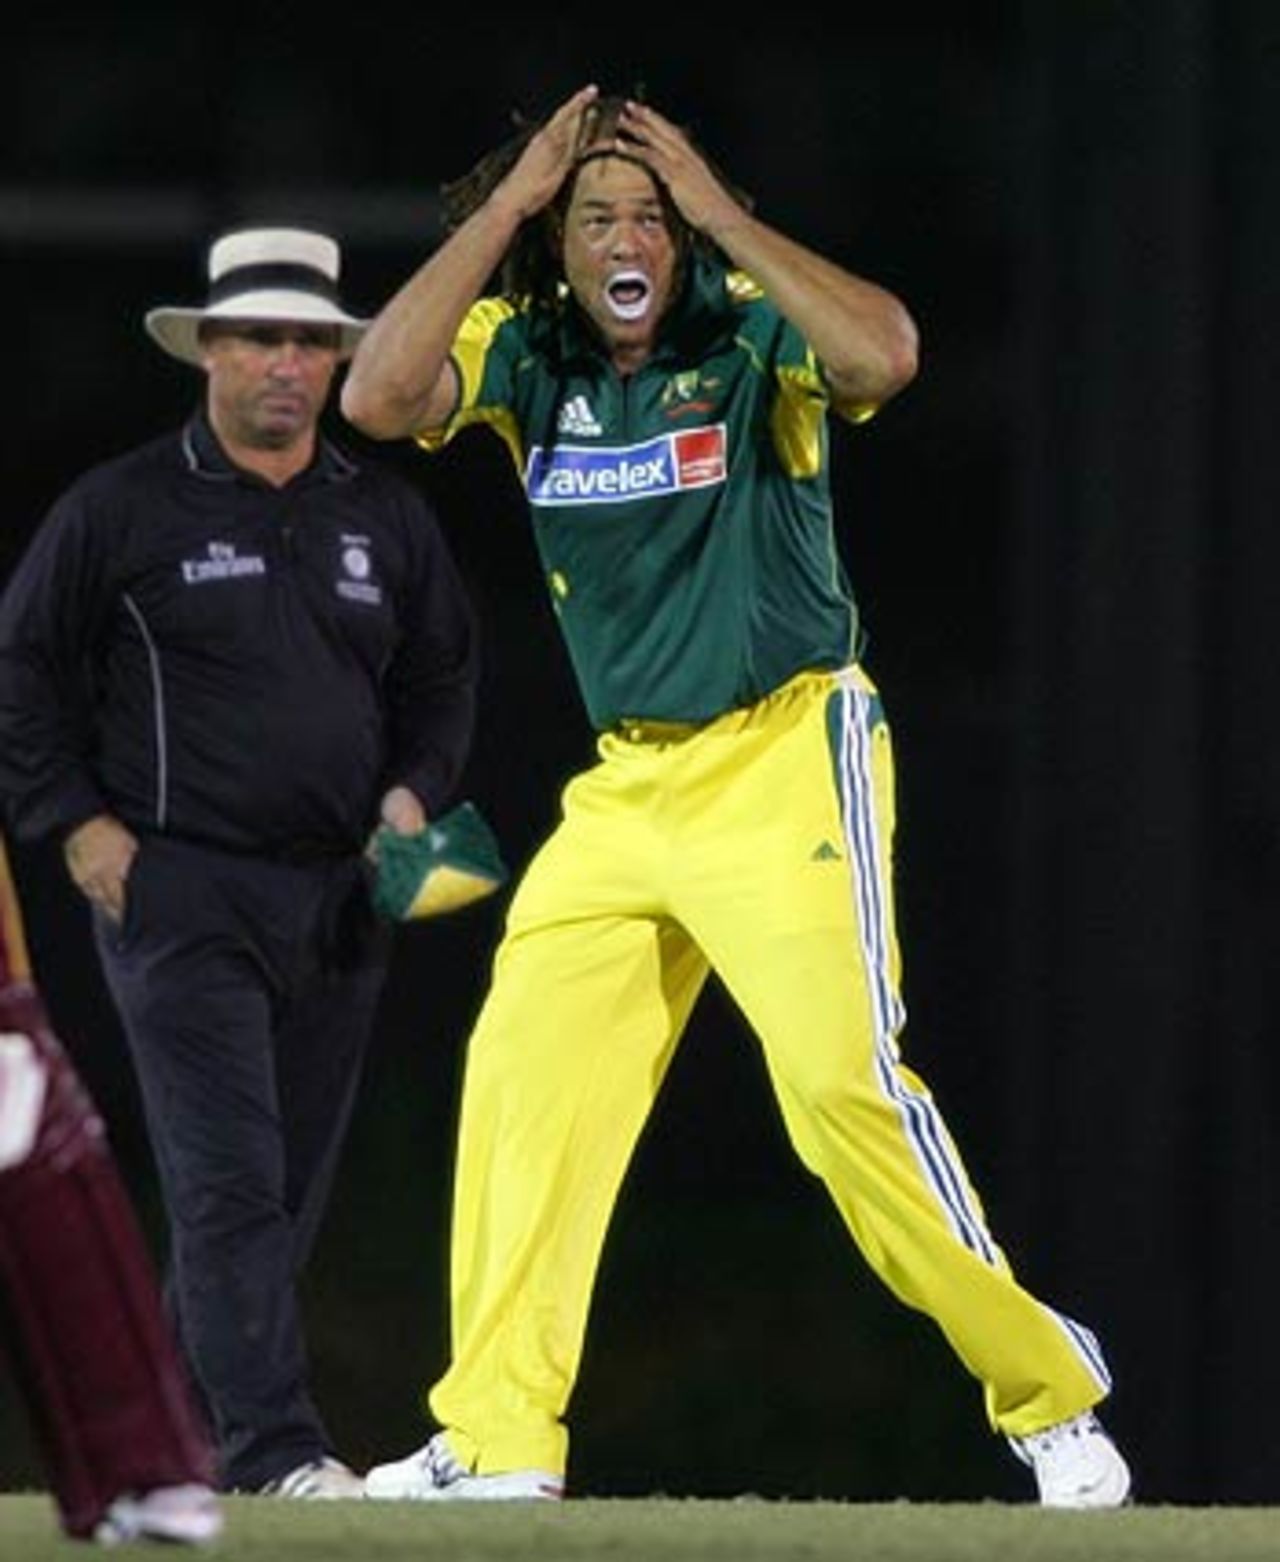 Andrew Symonds reacts after a run out chance goes abegging, Australia v West Indies, DLF Cup final, September 24, 2006